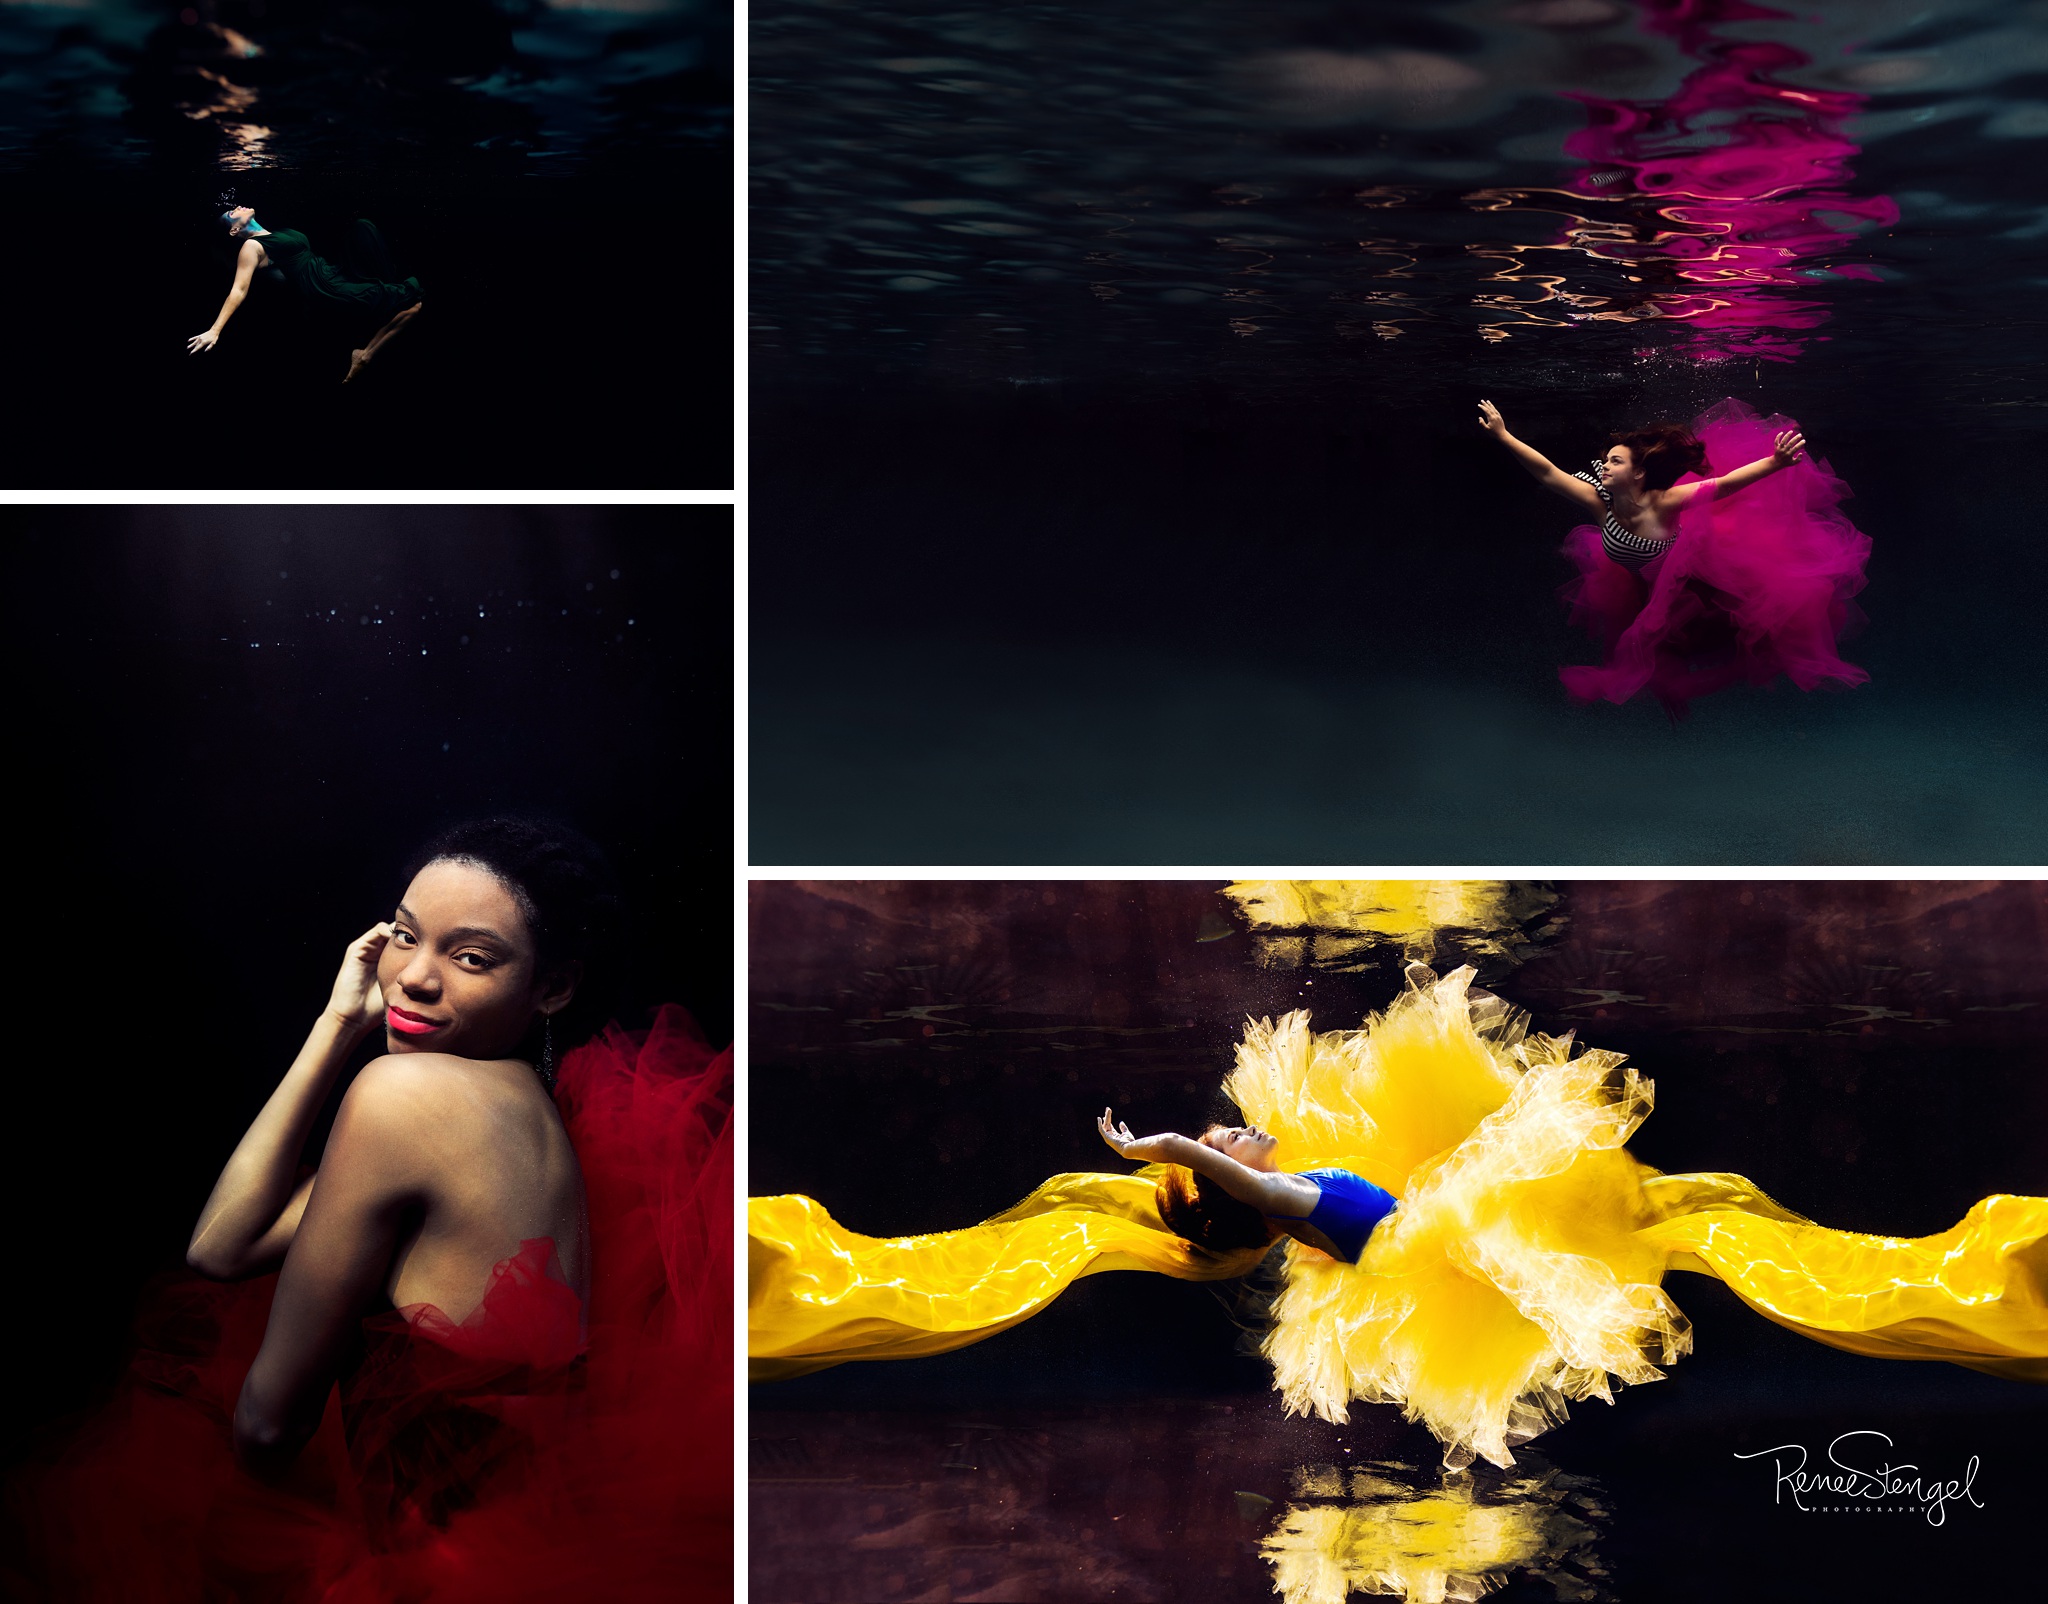 Collection of Gowns from the Studio Closet of Renee Stengel Photography for Non-Maternity Creative Underwater Portrait Sessions